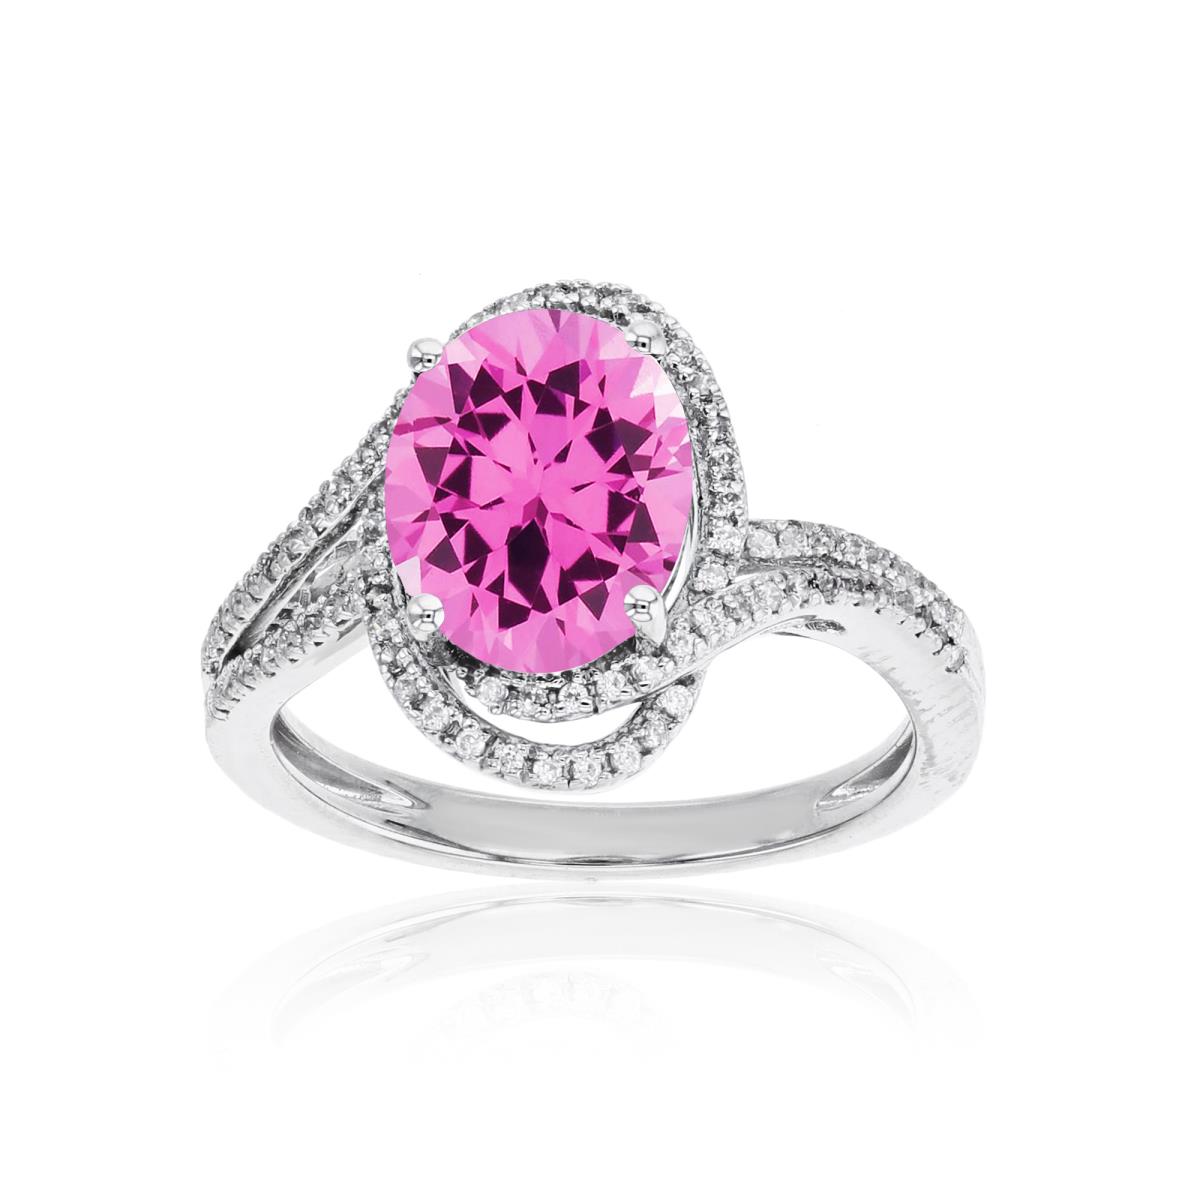 14K White Gold & 0.22CTTW & 10X8MM Ov. Ct. Pure Pink Ring